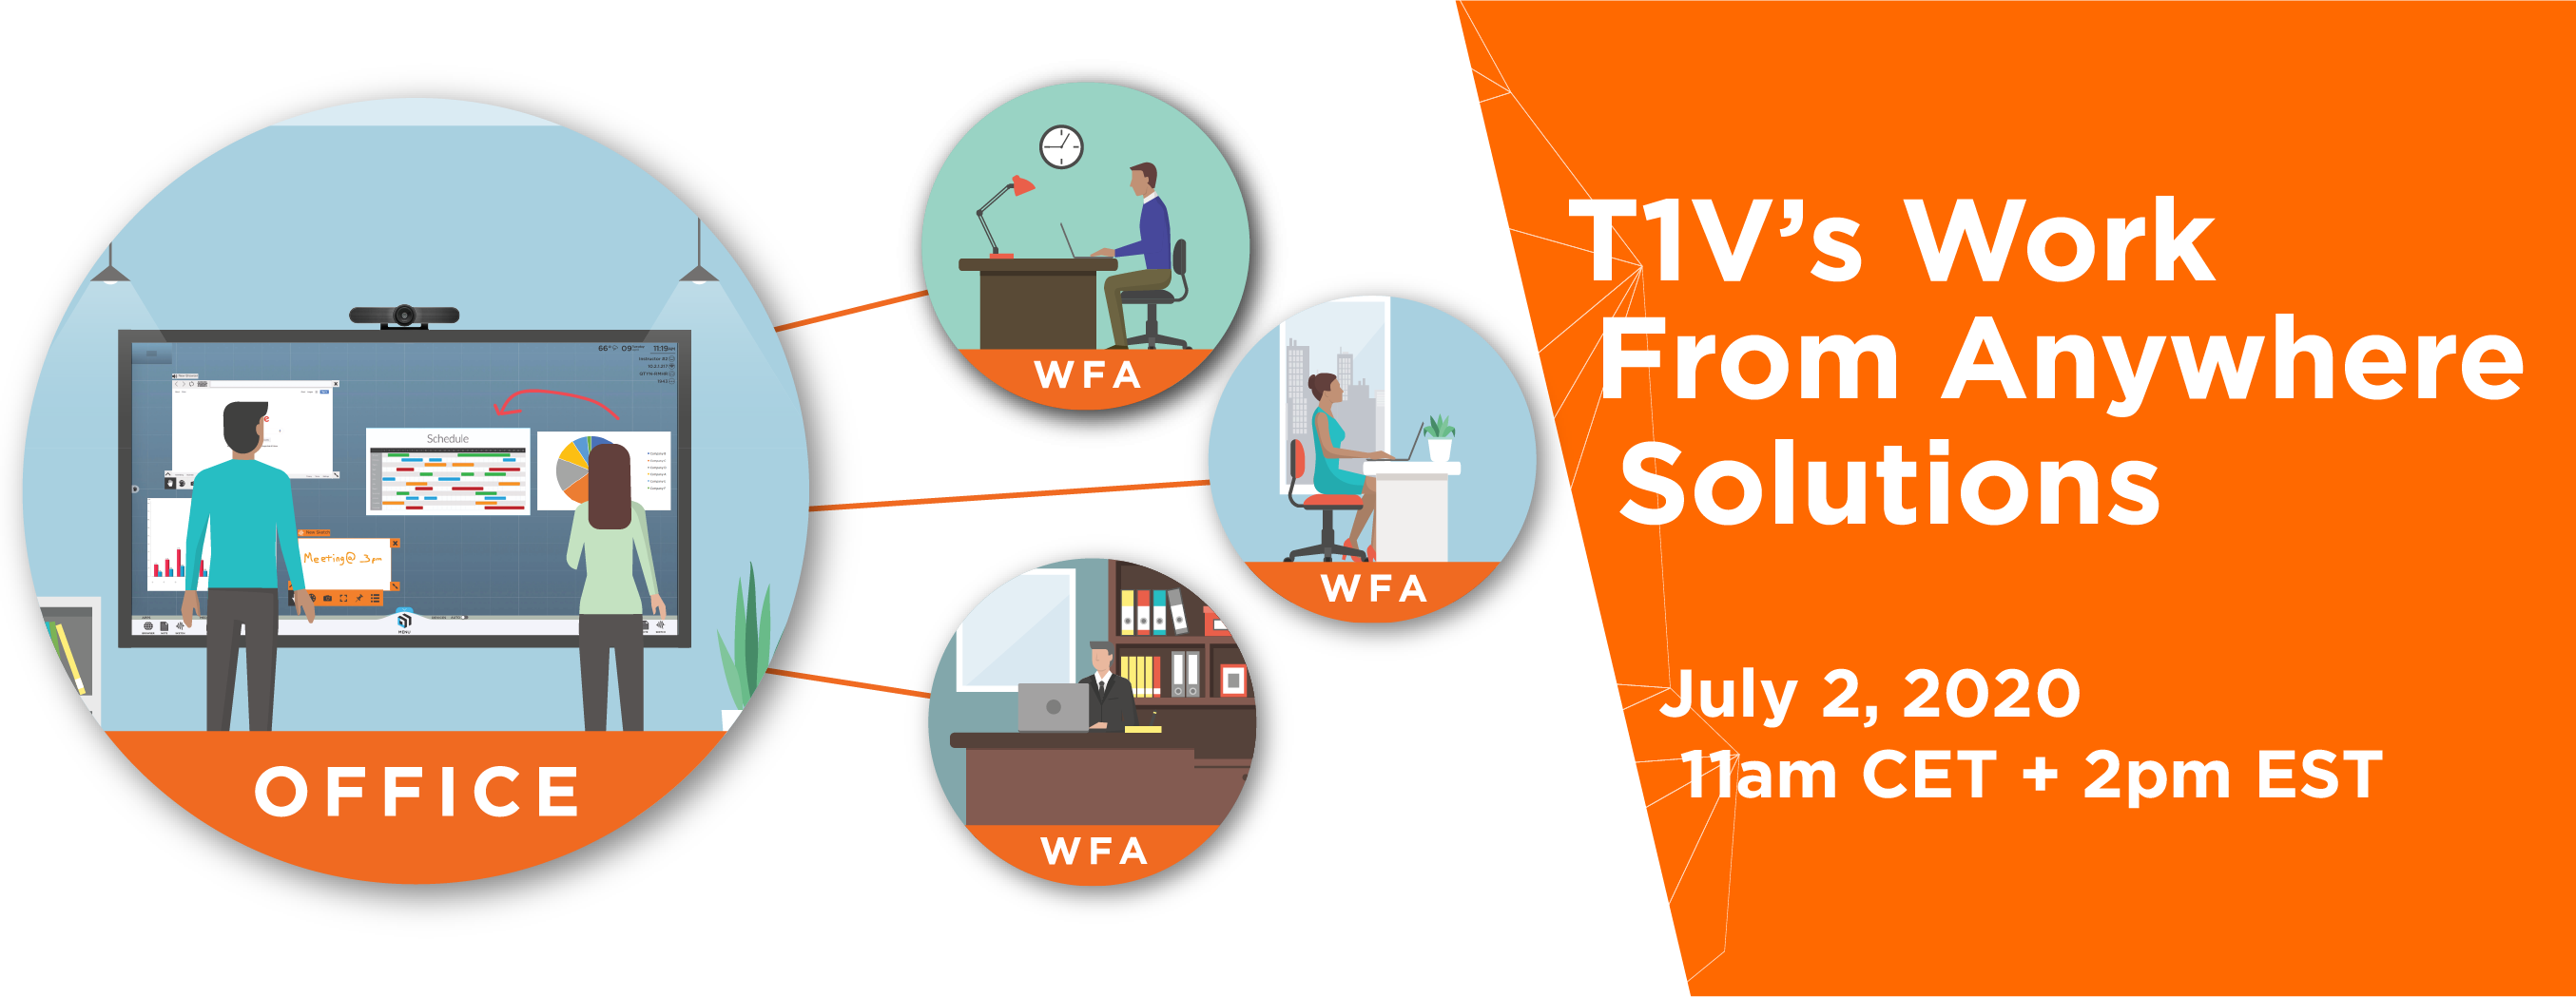 t1v-wfa-solutions-work-from-anywhere-webinar-07.02.2020-email-graphic